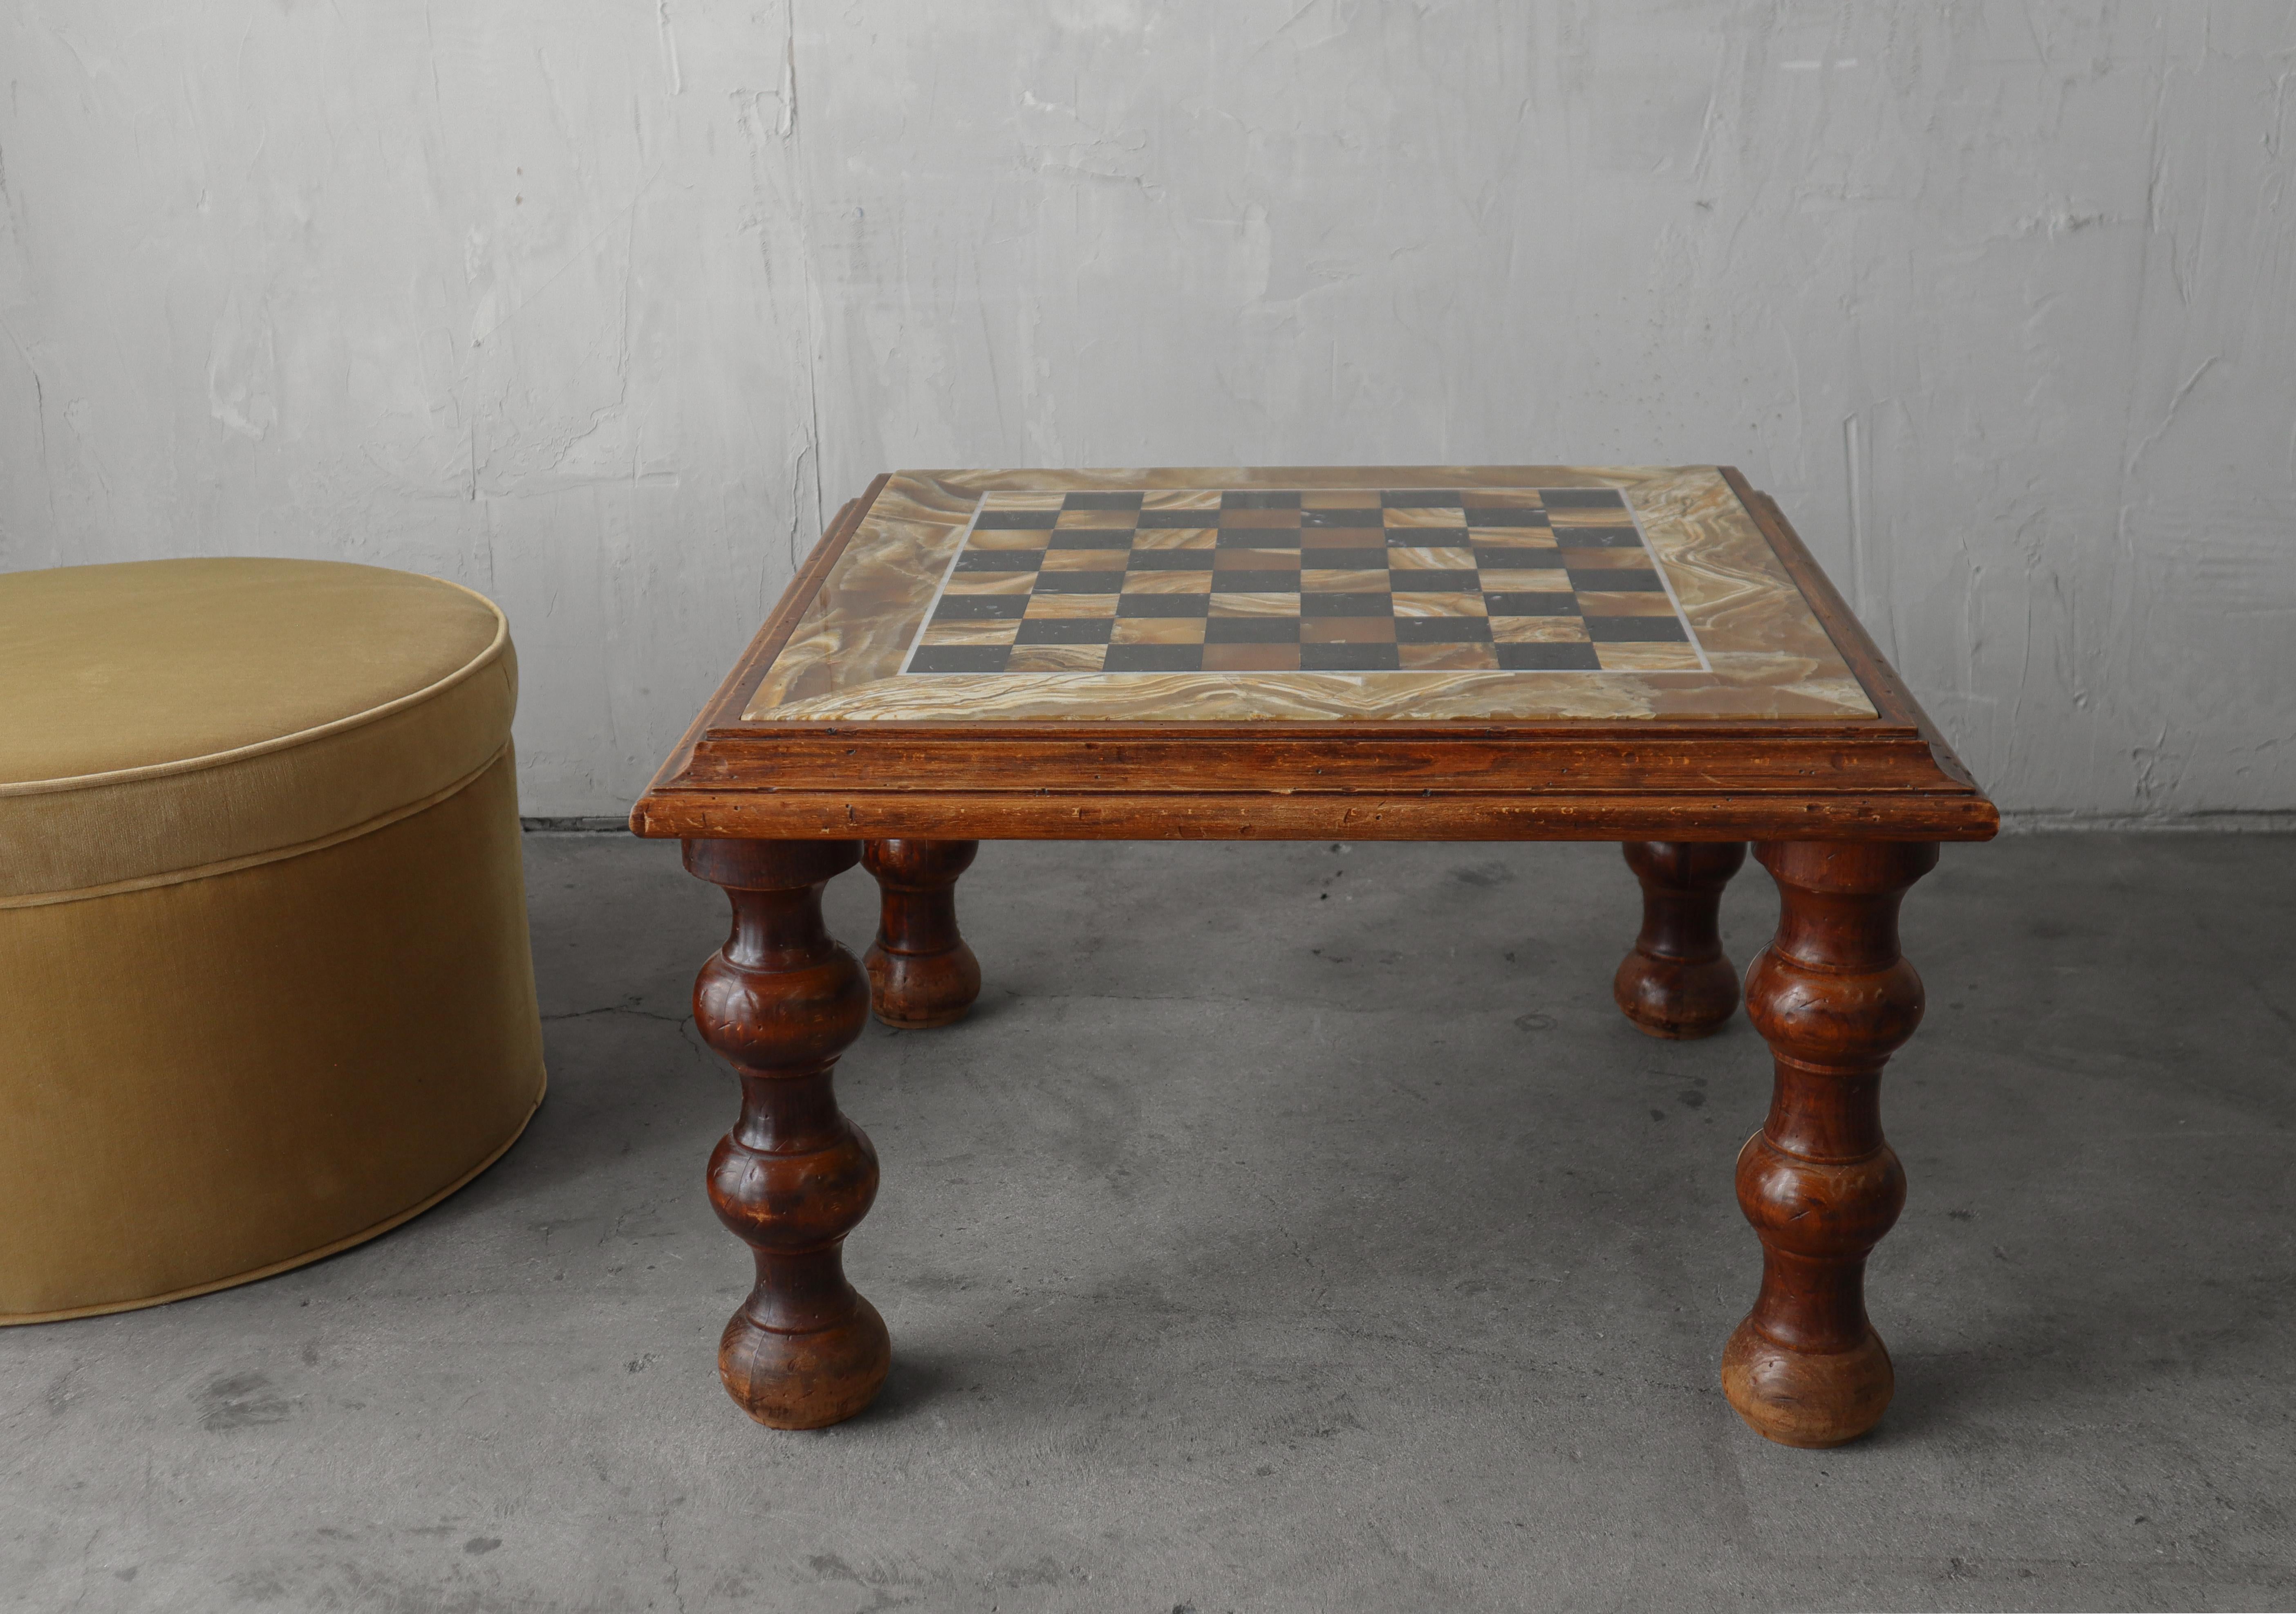 Antique Onyx & Marble Chess Checkerboard Game Coffee Table In Good Condition For Sale In Las Vegas, NV